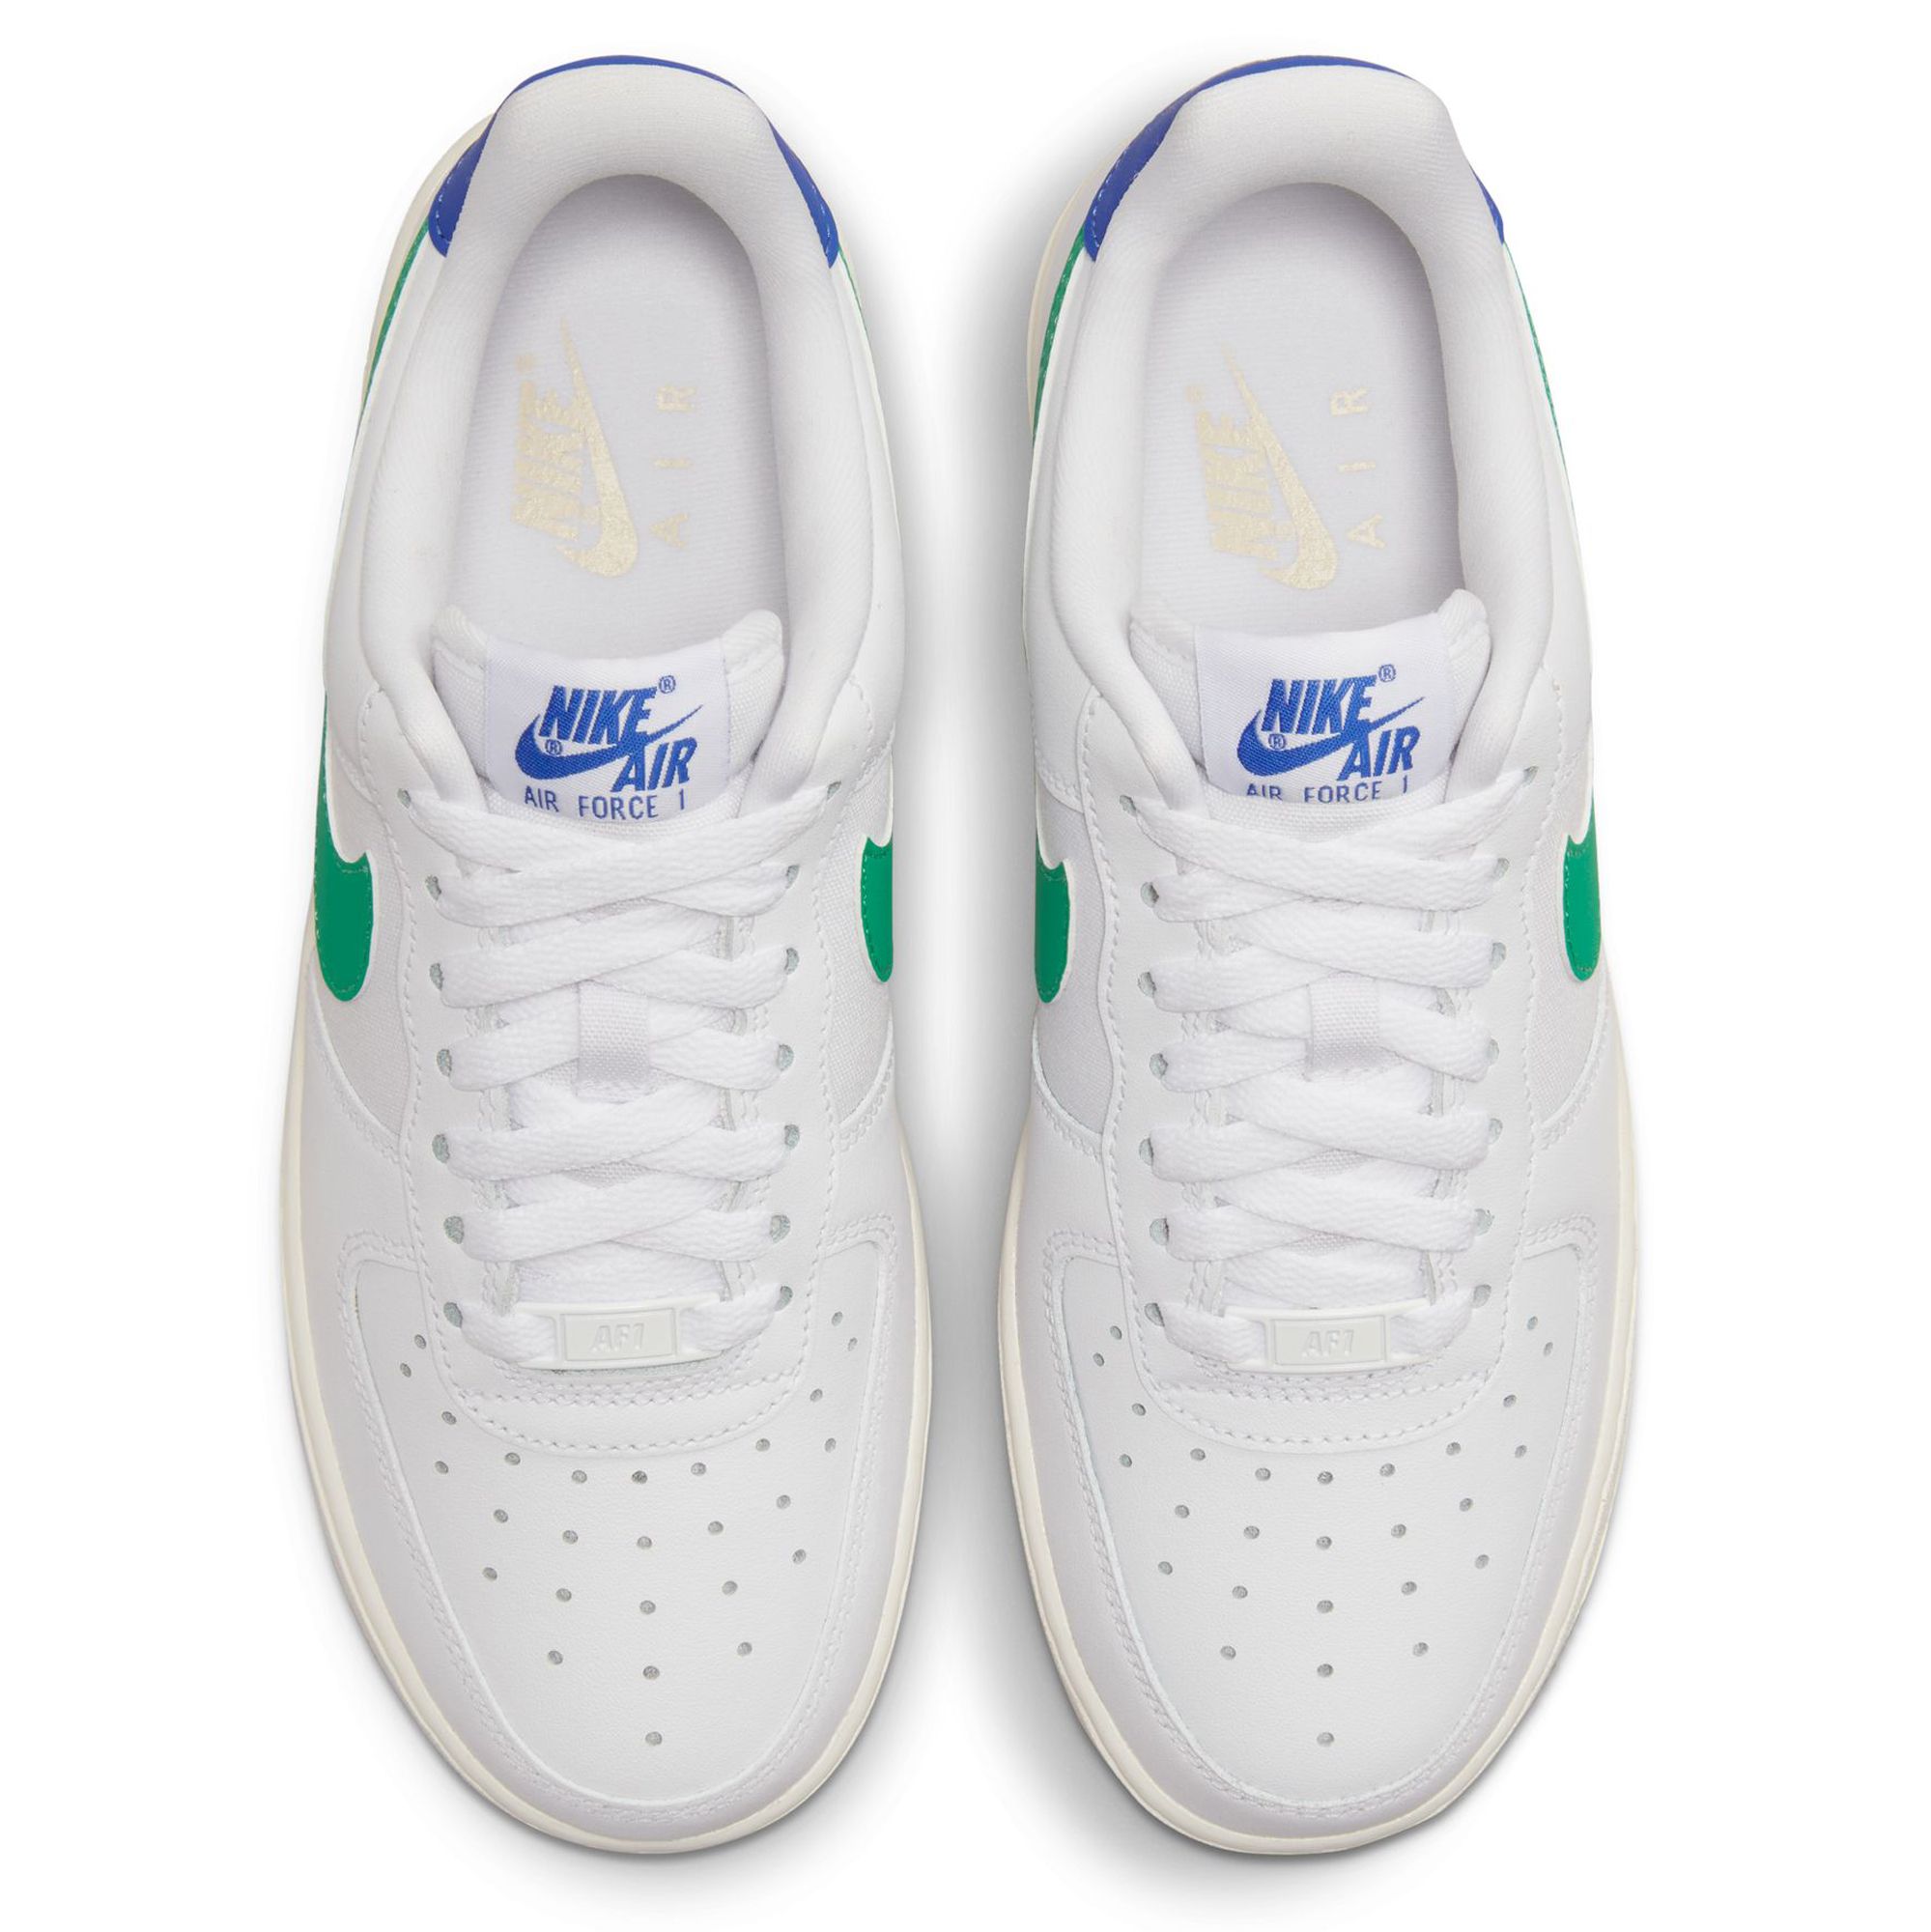 Nike Women's Air Force 1 '07 Shoes, Size 6.5, White/Action Green